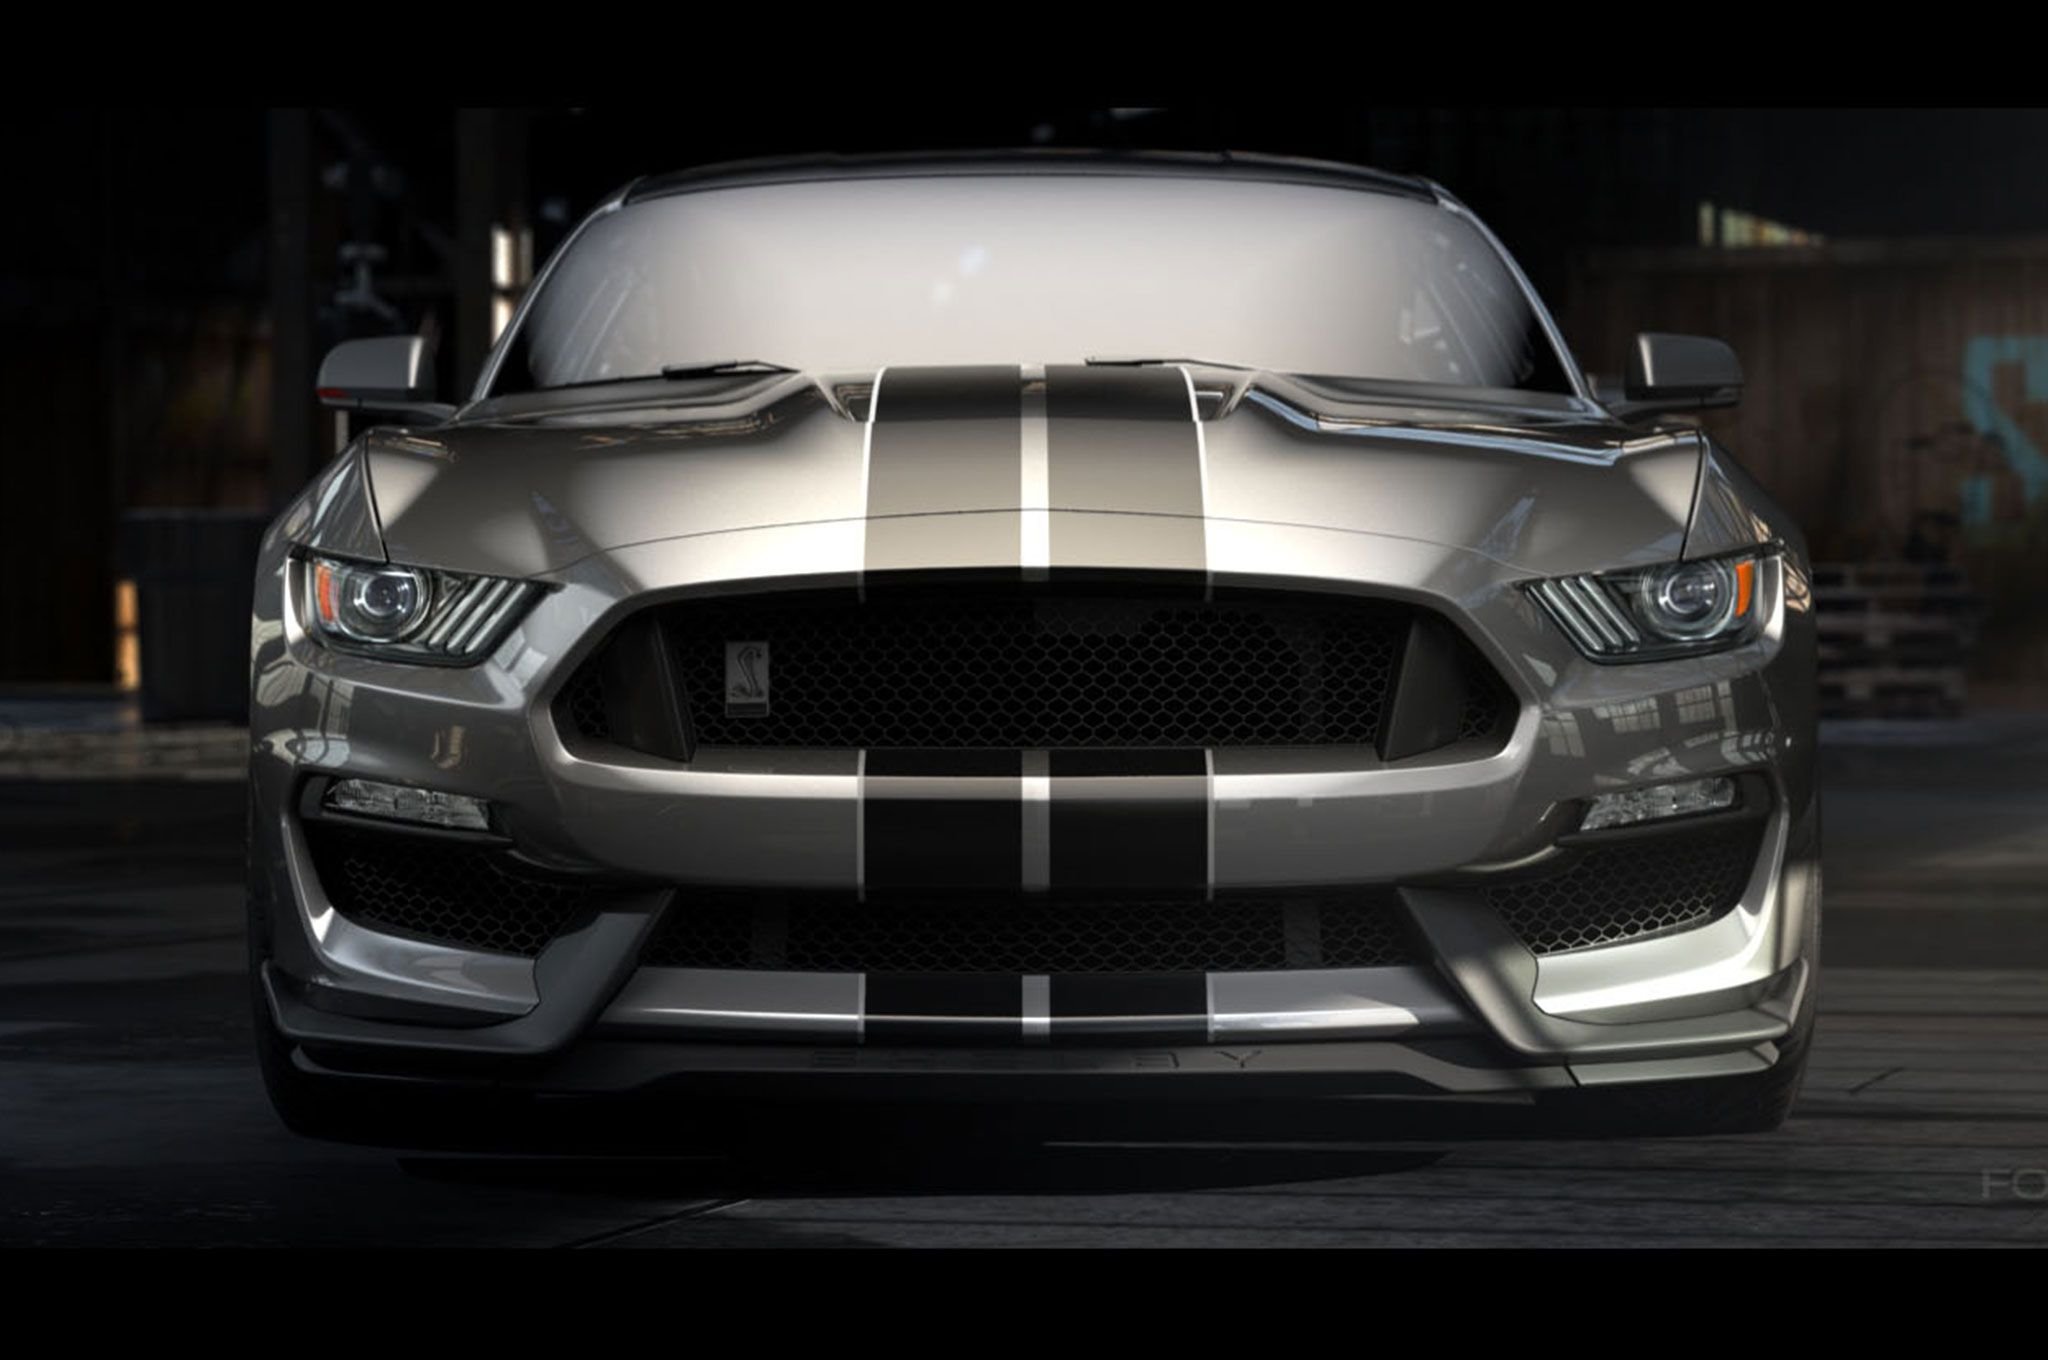 2015, Ford, Mustang, Shelby, Cobra, Gt, 350, Muscle, Supercar, Usa, 2048x1360 01 Wallpaper